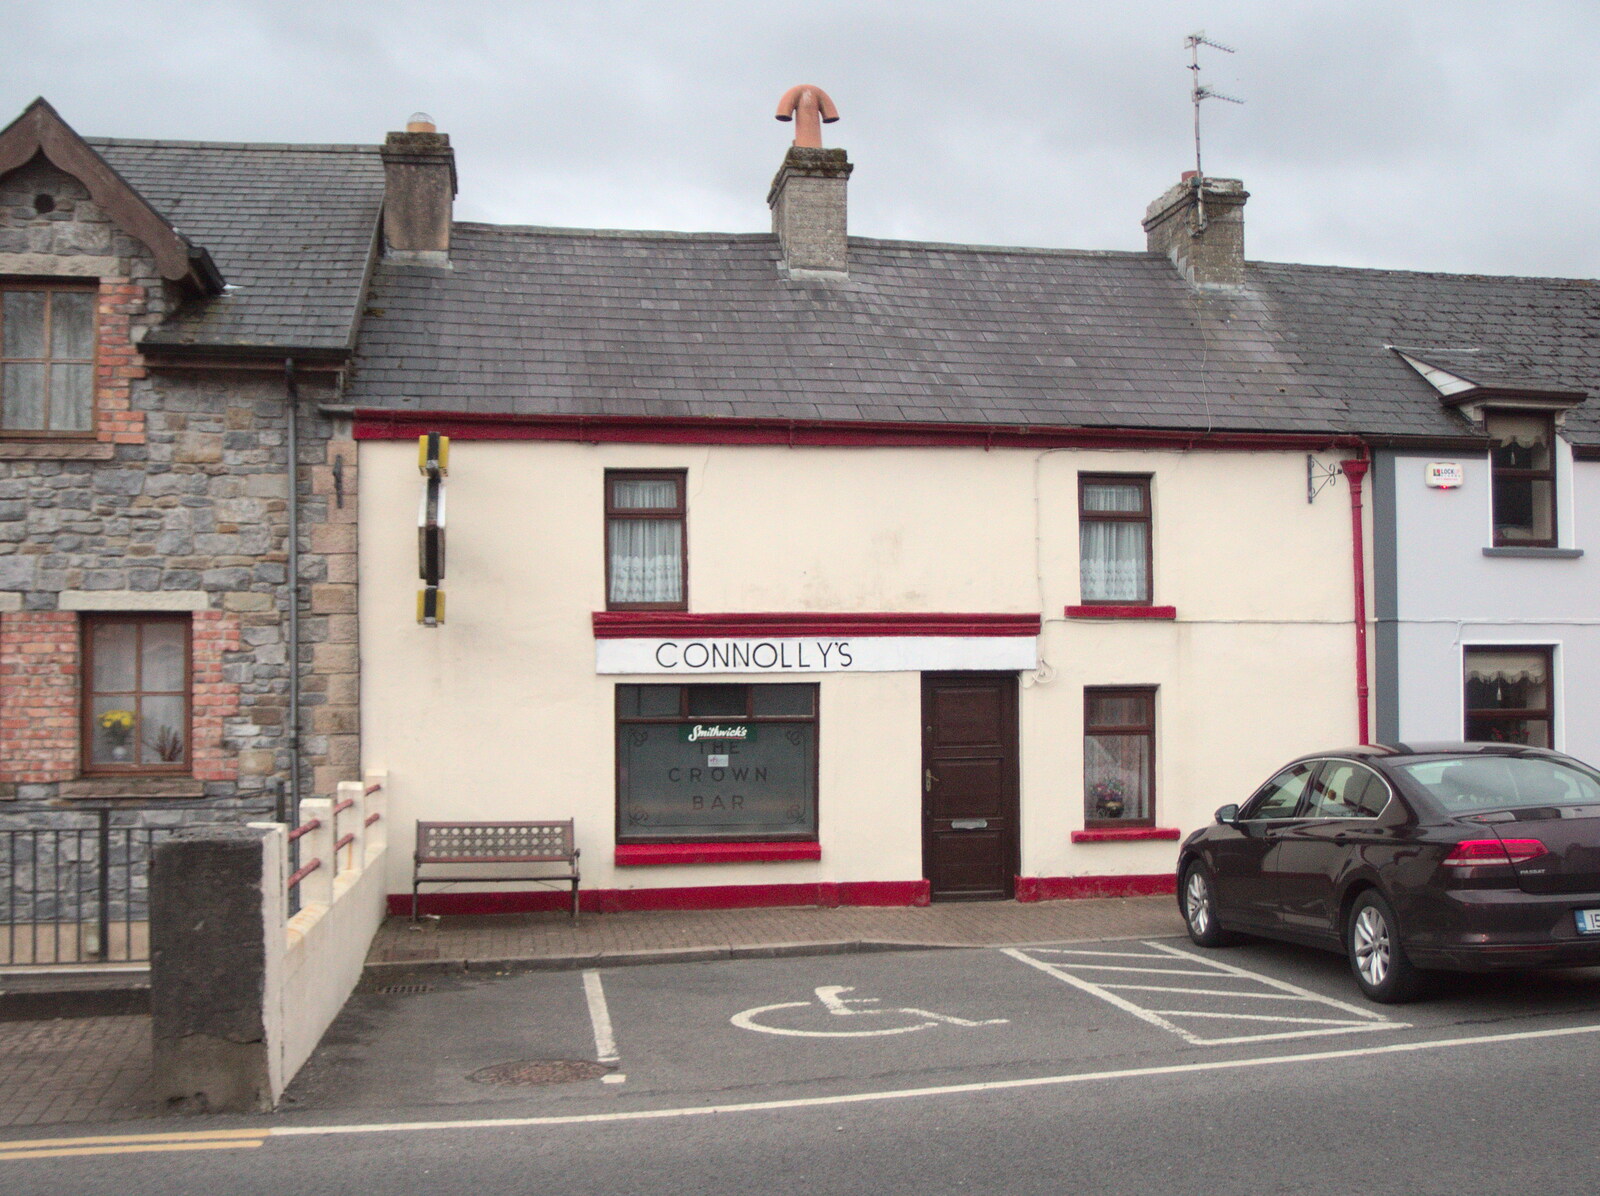 Connolly's has closed due to retirement from Manorhamilton and Bundoran, Leitrim and Donegal, Ireland - 16th April 2022